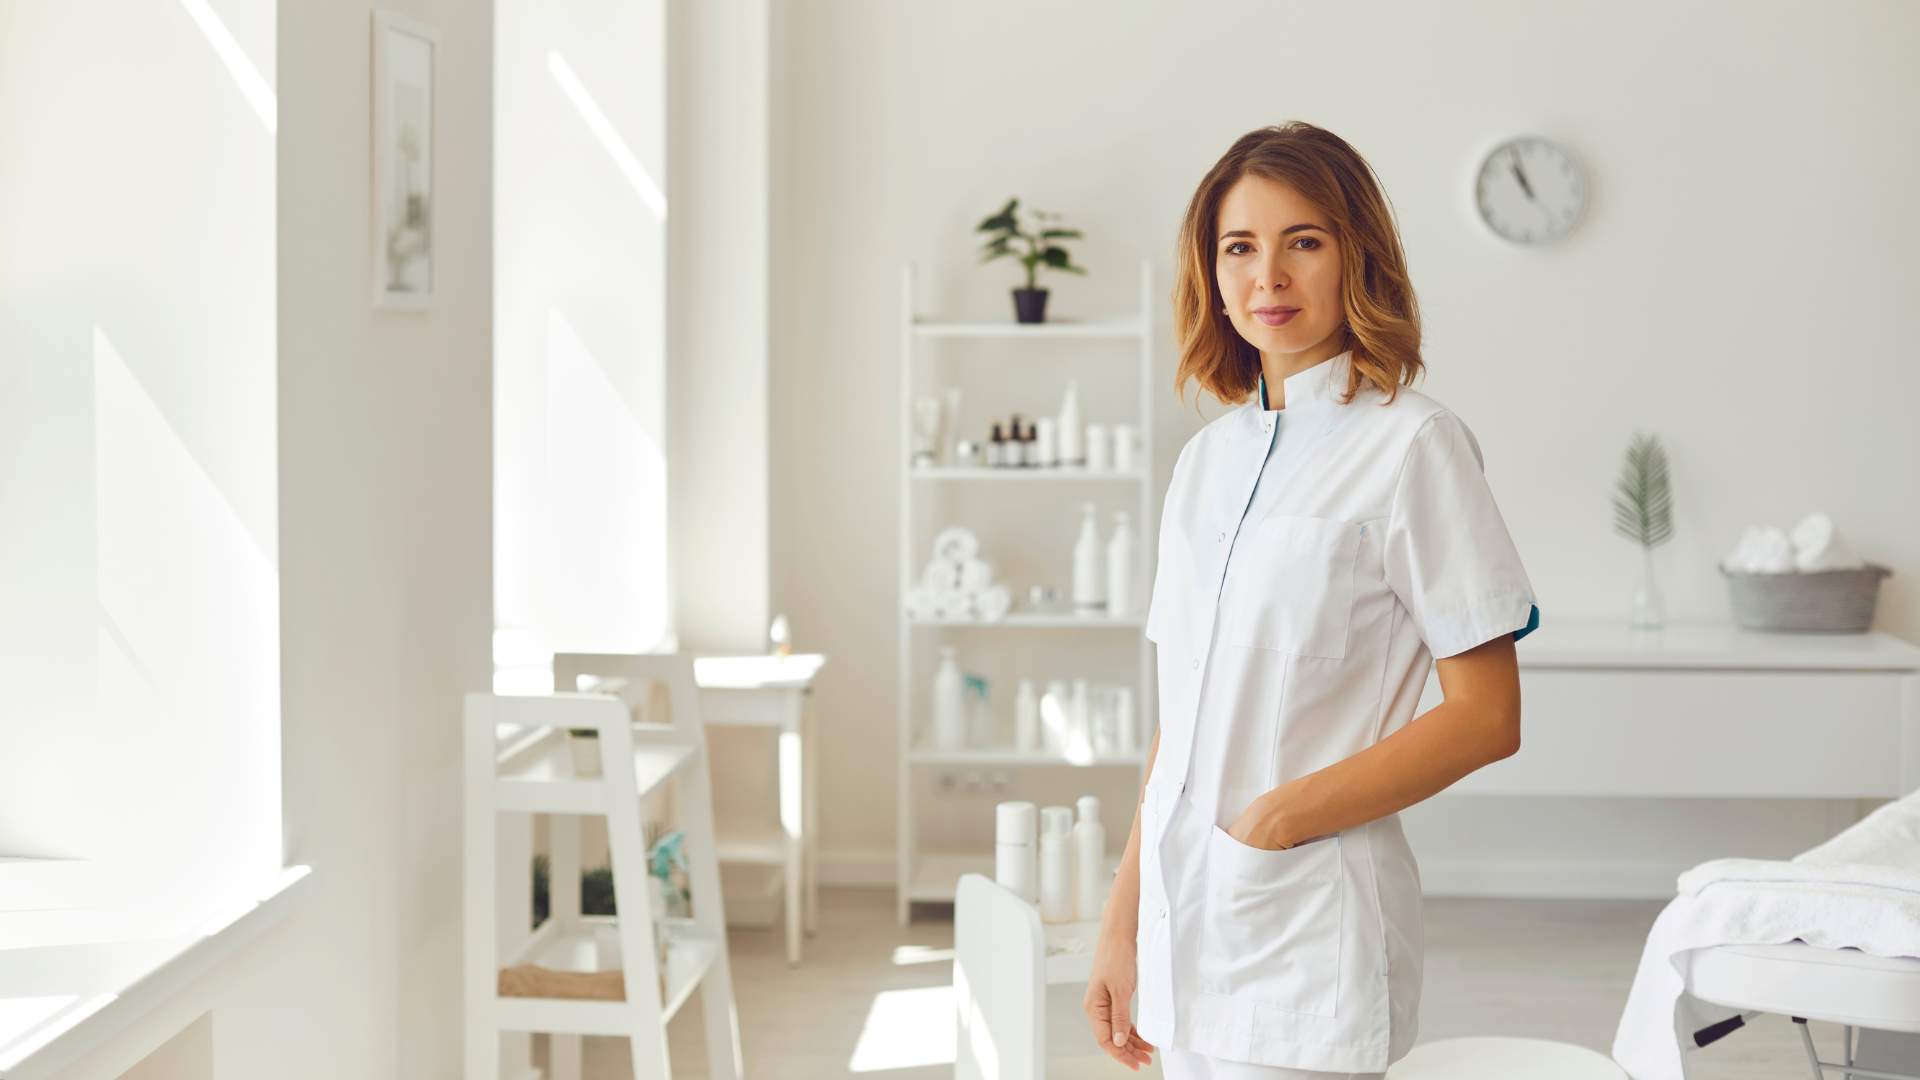 Smiling Woman Cosmetologist or Dermatologist Standing and Looking at Camera in Beauty Spa Salon